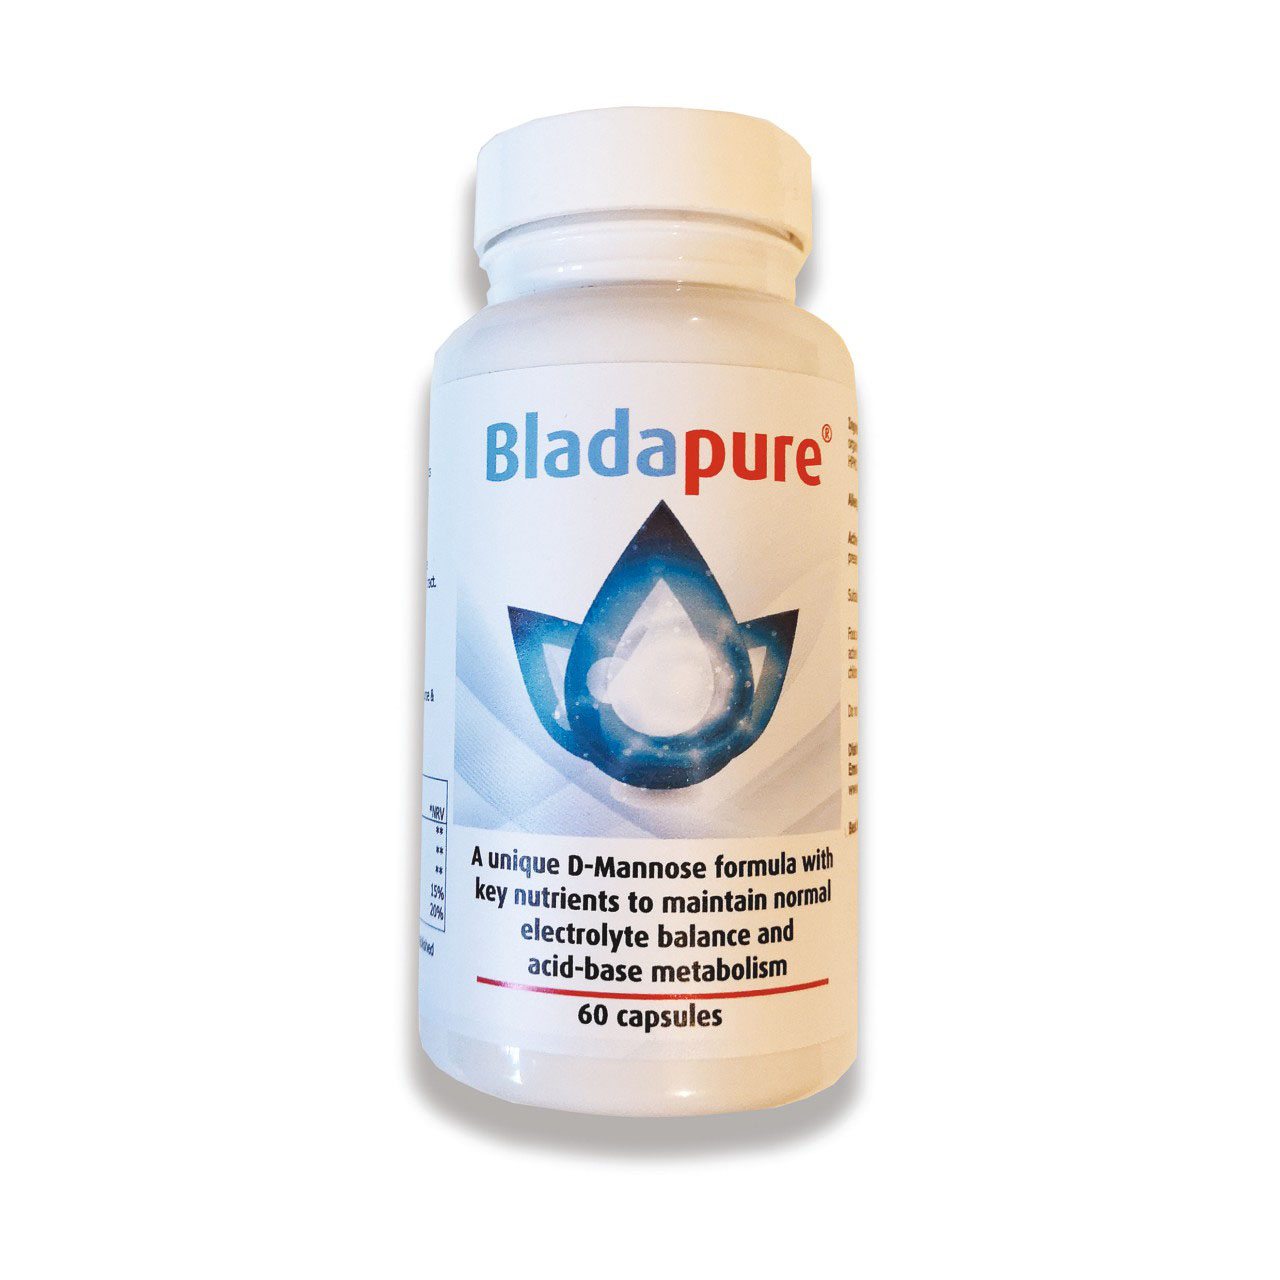 Bladapure D-Mannose Bladder Infection Food Supplement - 60 Capsules